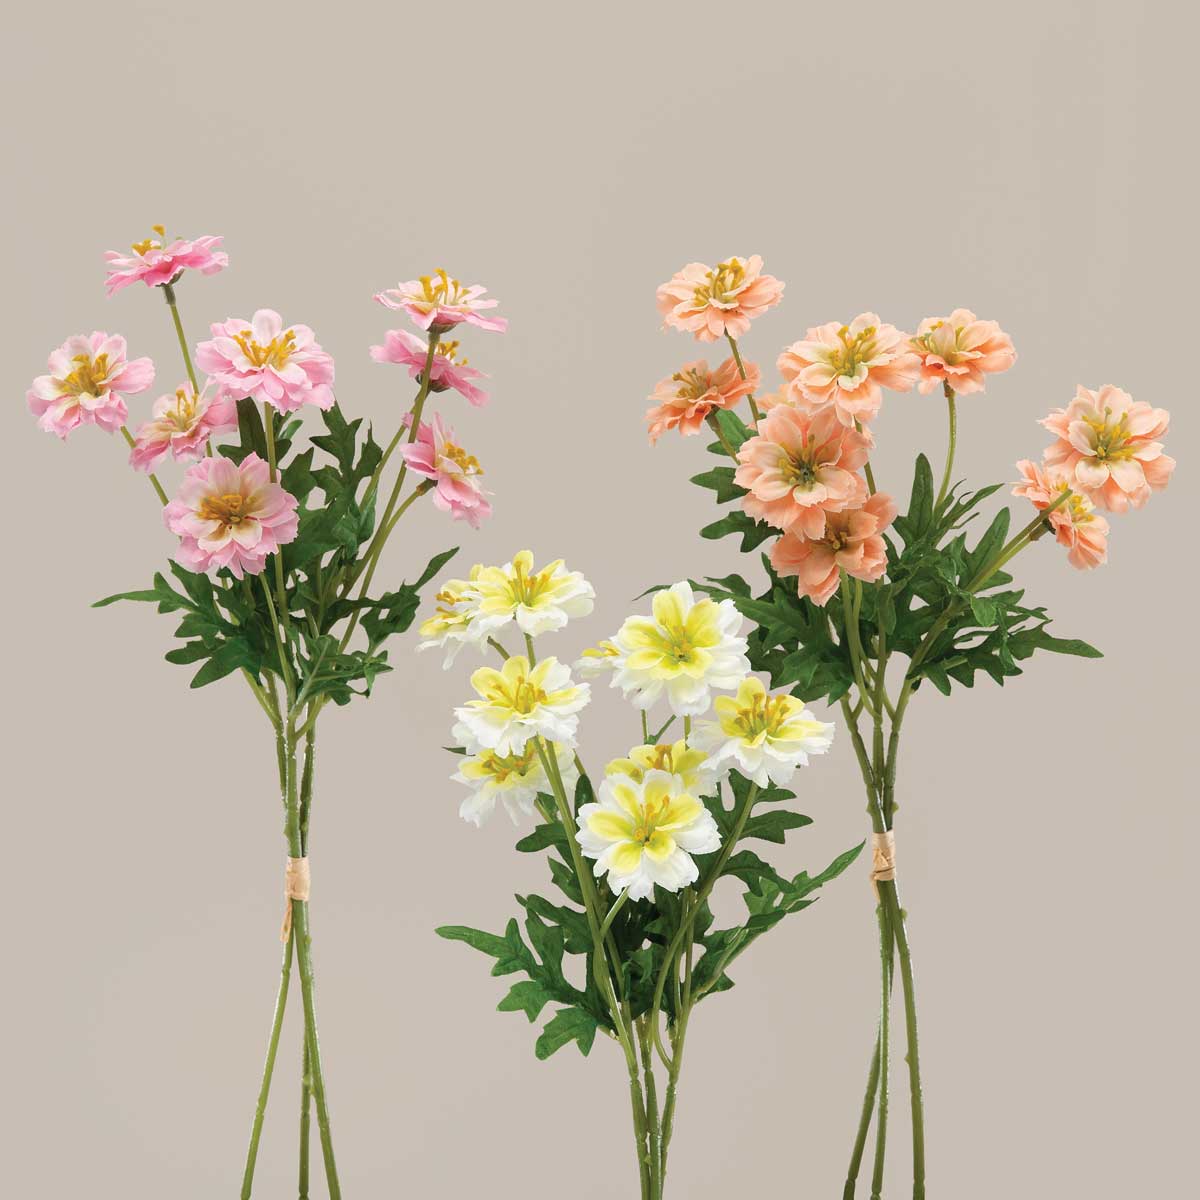 BUNDLE OF 3 COREOPSIS PINK 7IN X 14IN POLYESTER TIED WITH RAFFIA